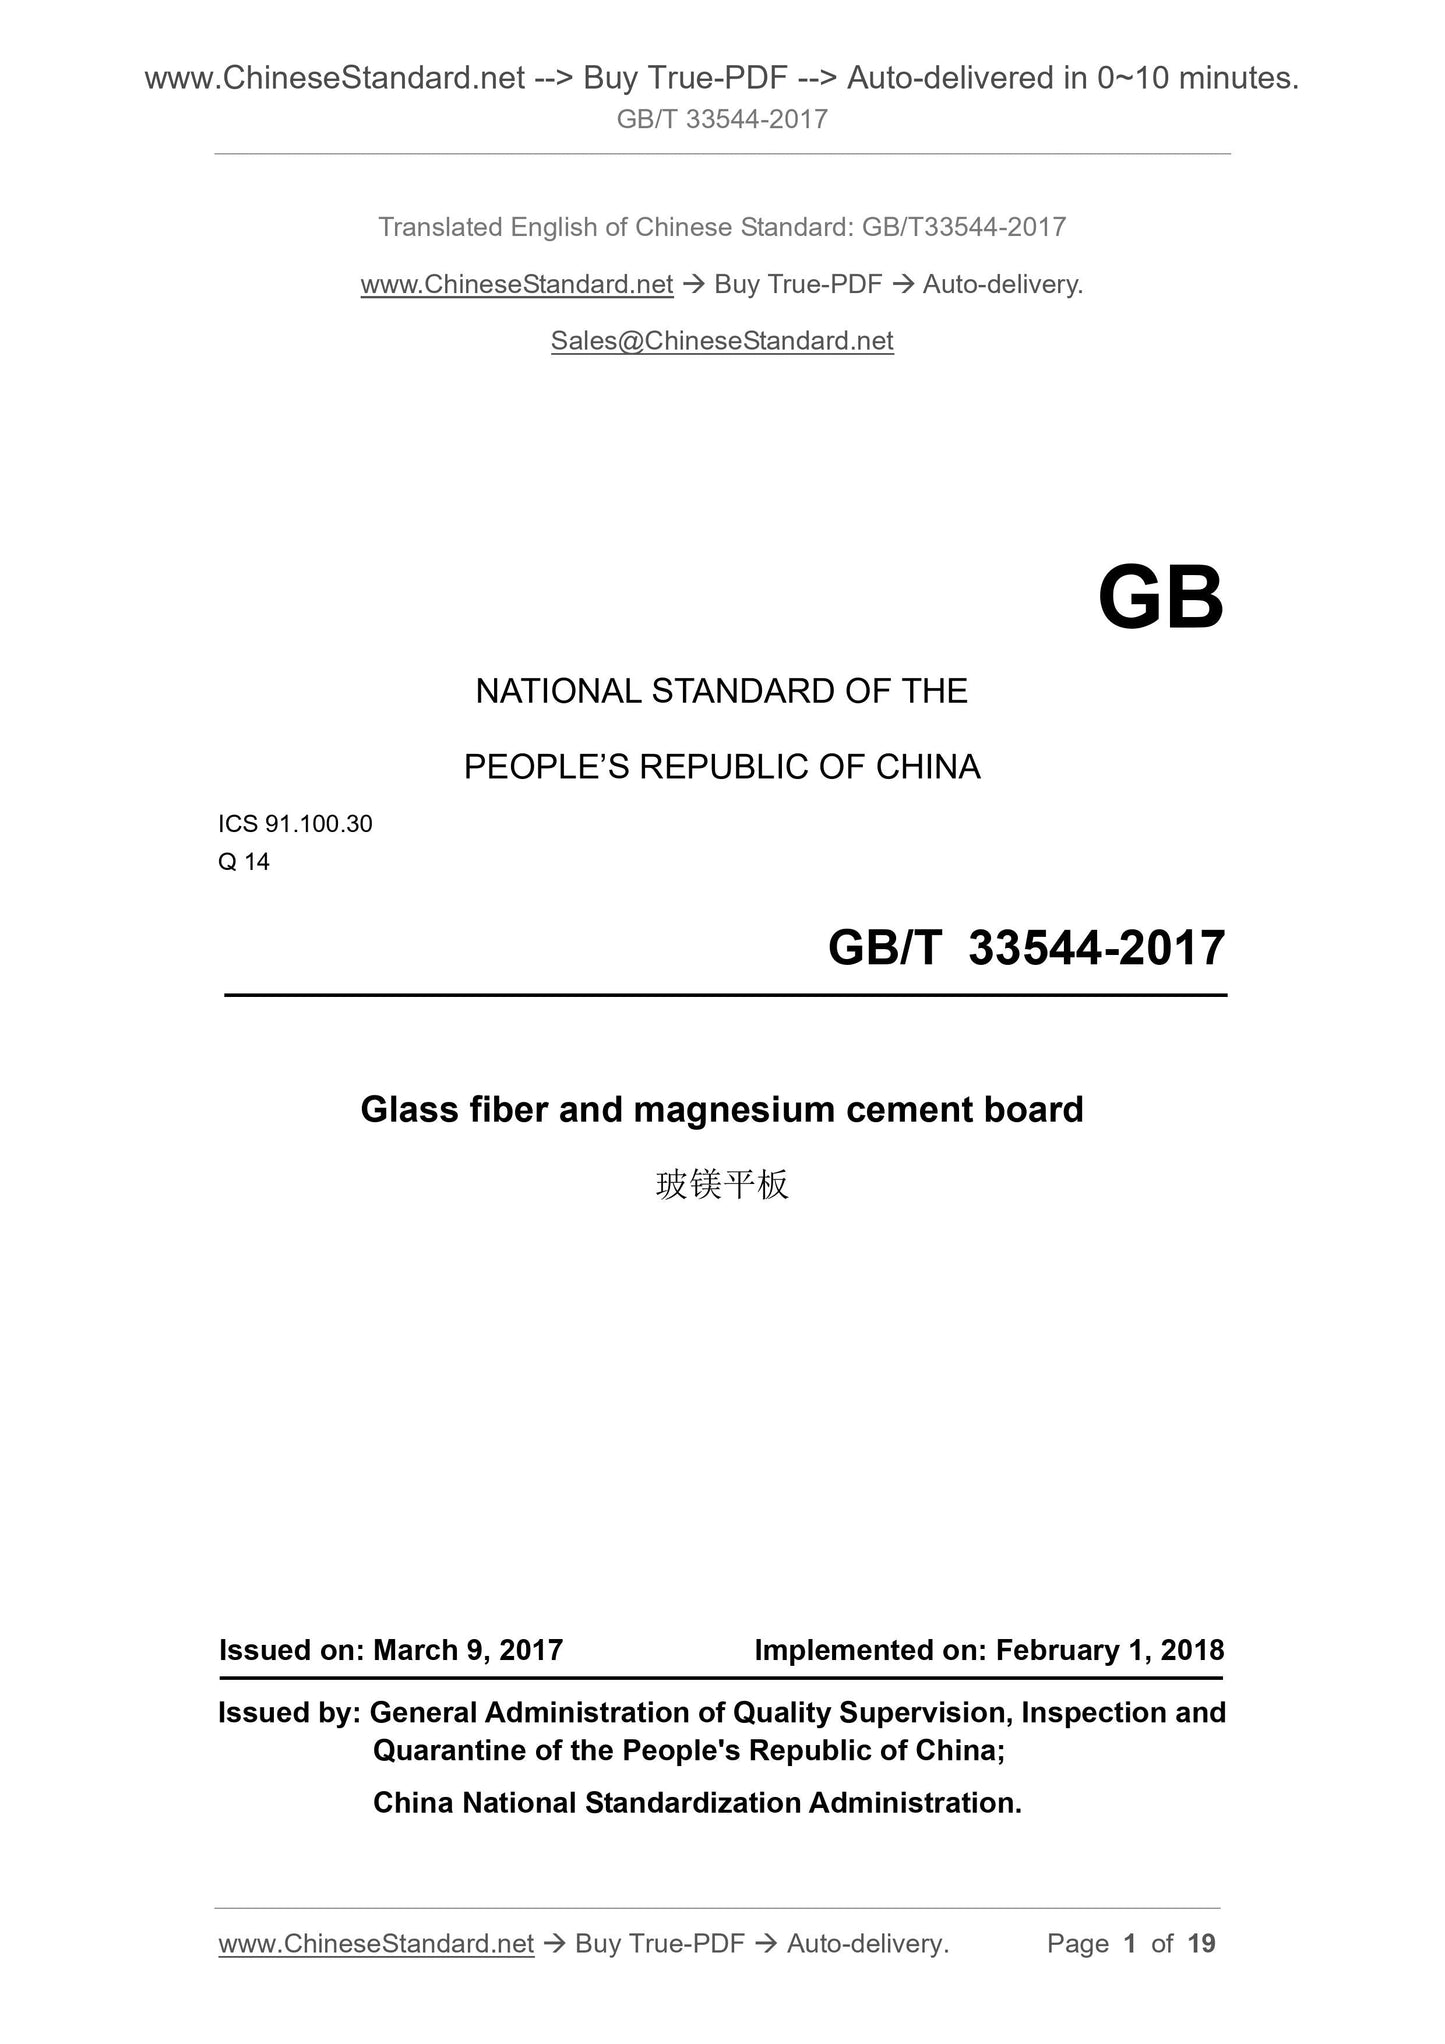 GB/T 33544-2017 Page 1